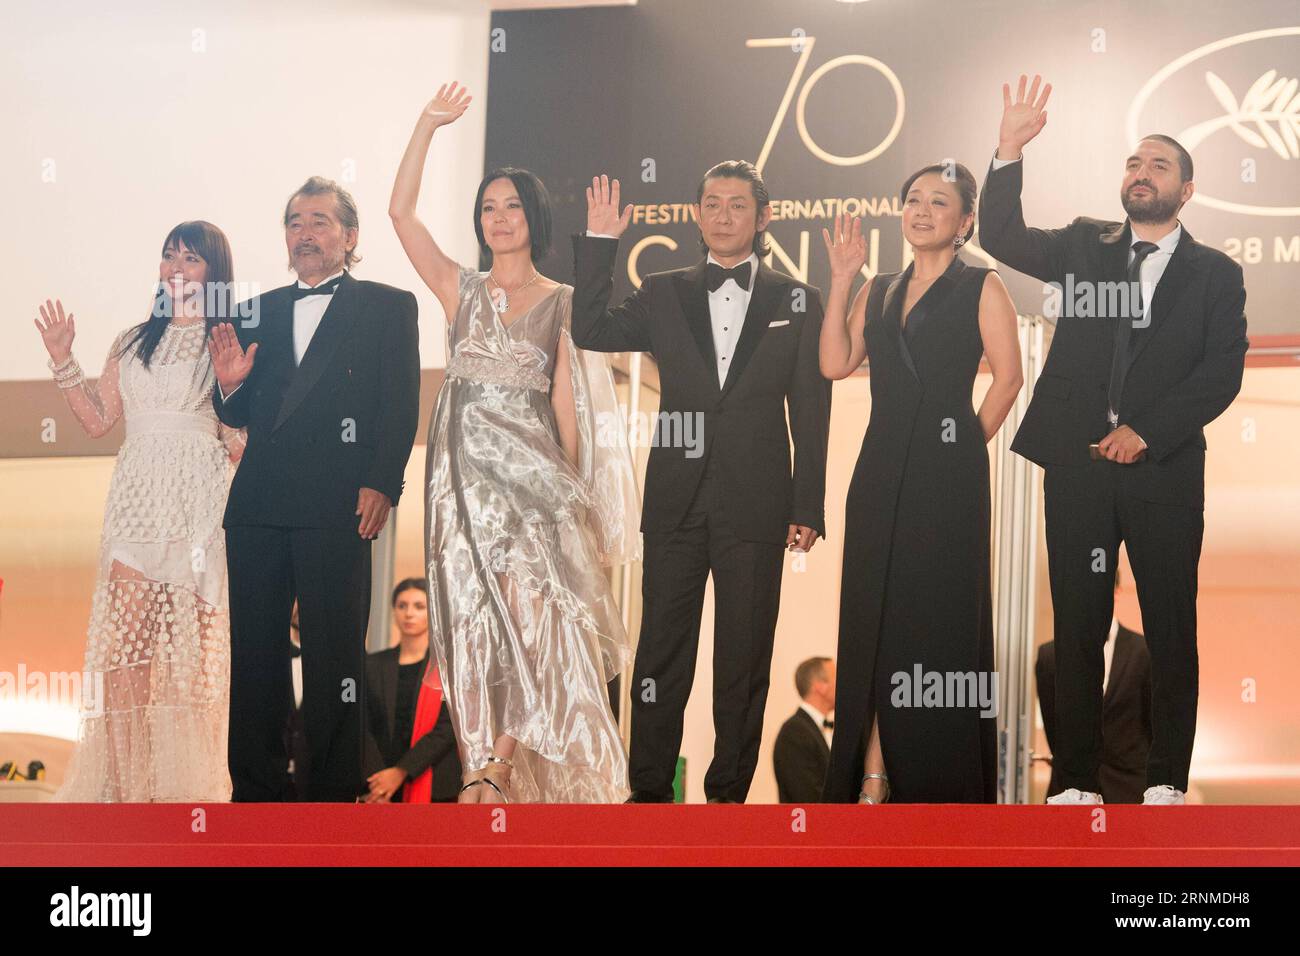 (170524) -- CANNES, May 24, 2017 -- Actress Ayame Misaki, actor Tatsuya Fuji, Director Naomi Kawase, actor Masatoshi Nagase, actress Misuzu Kanno and composer Ibrahim Maalouf (L-R), pose on the red carpet for the screening of the film Radiance in competition at the 70th Cannes Film Festival in Cannes, France, May 23, 2017. ) (jmmn) FRANCE-CANNES-70TH CANNES FILM FESTIVAL-IN COMPETITION-RADIANCE-RED CARPET ChenxYichen PUBLICATIONxNOTxINxCHN   Cannes May 24 2017 actress Ayame Misaki Actor Tatsuya Fuji Director Naomi Kawase Actor Masatoshi NAGASE actress  Kanno and Composer Ibrahim Maalouf l r Po Stock Photo